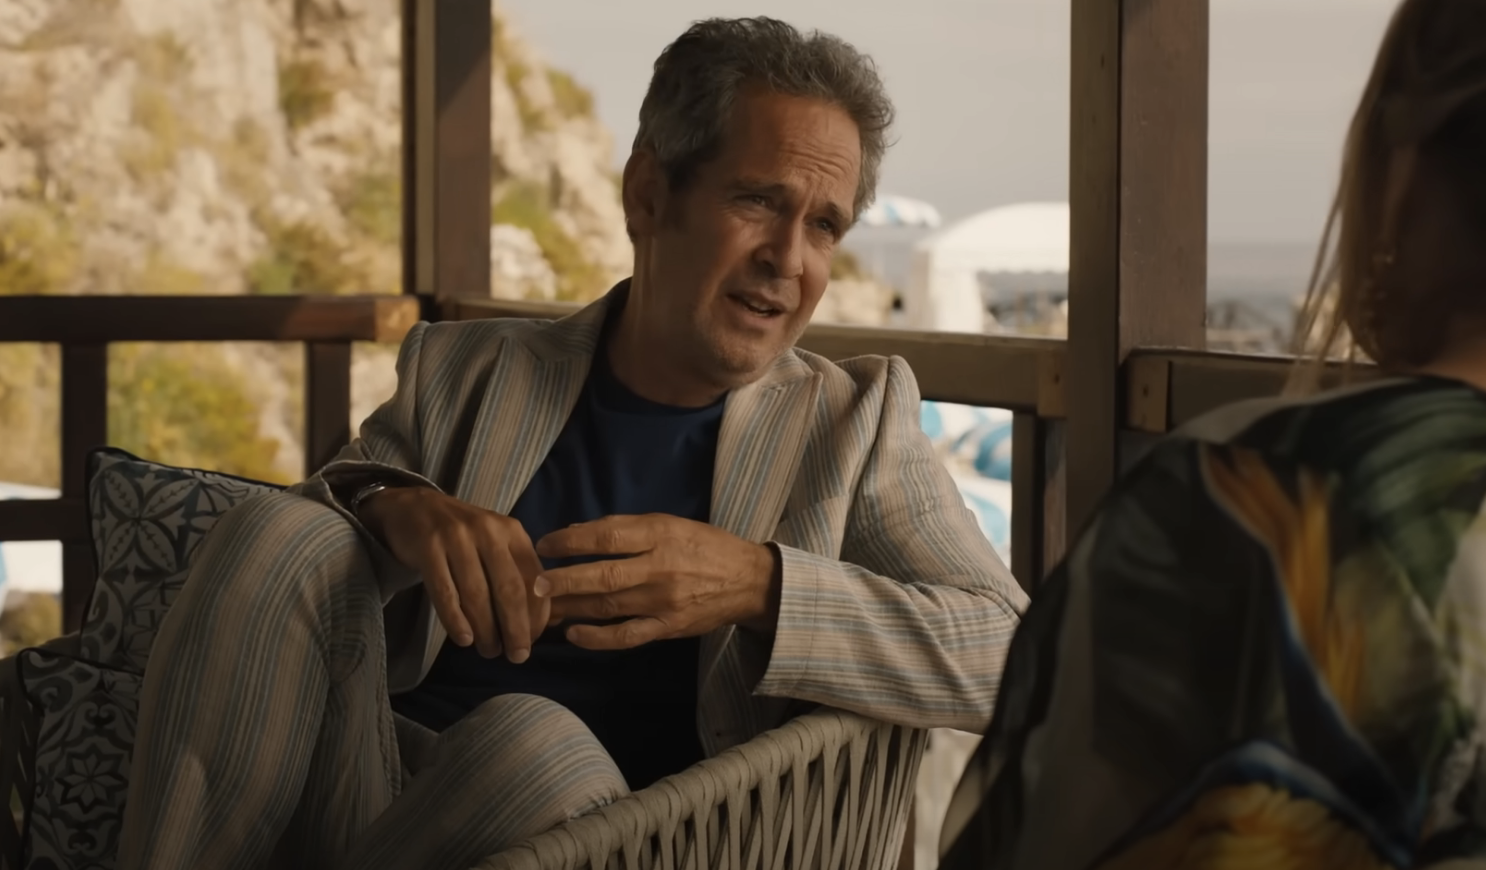 tom in a striped suit sits, conversing with an unseen character in a film scene